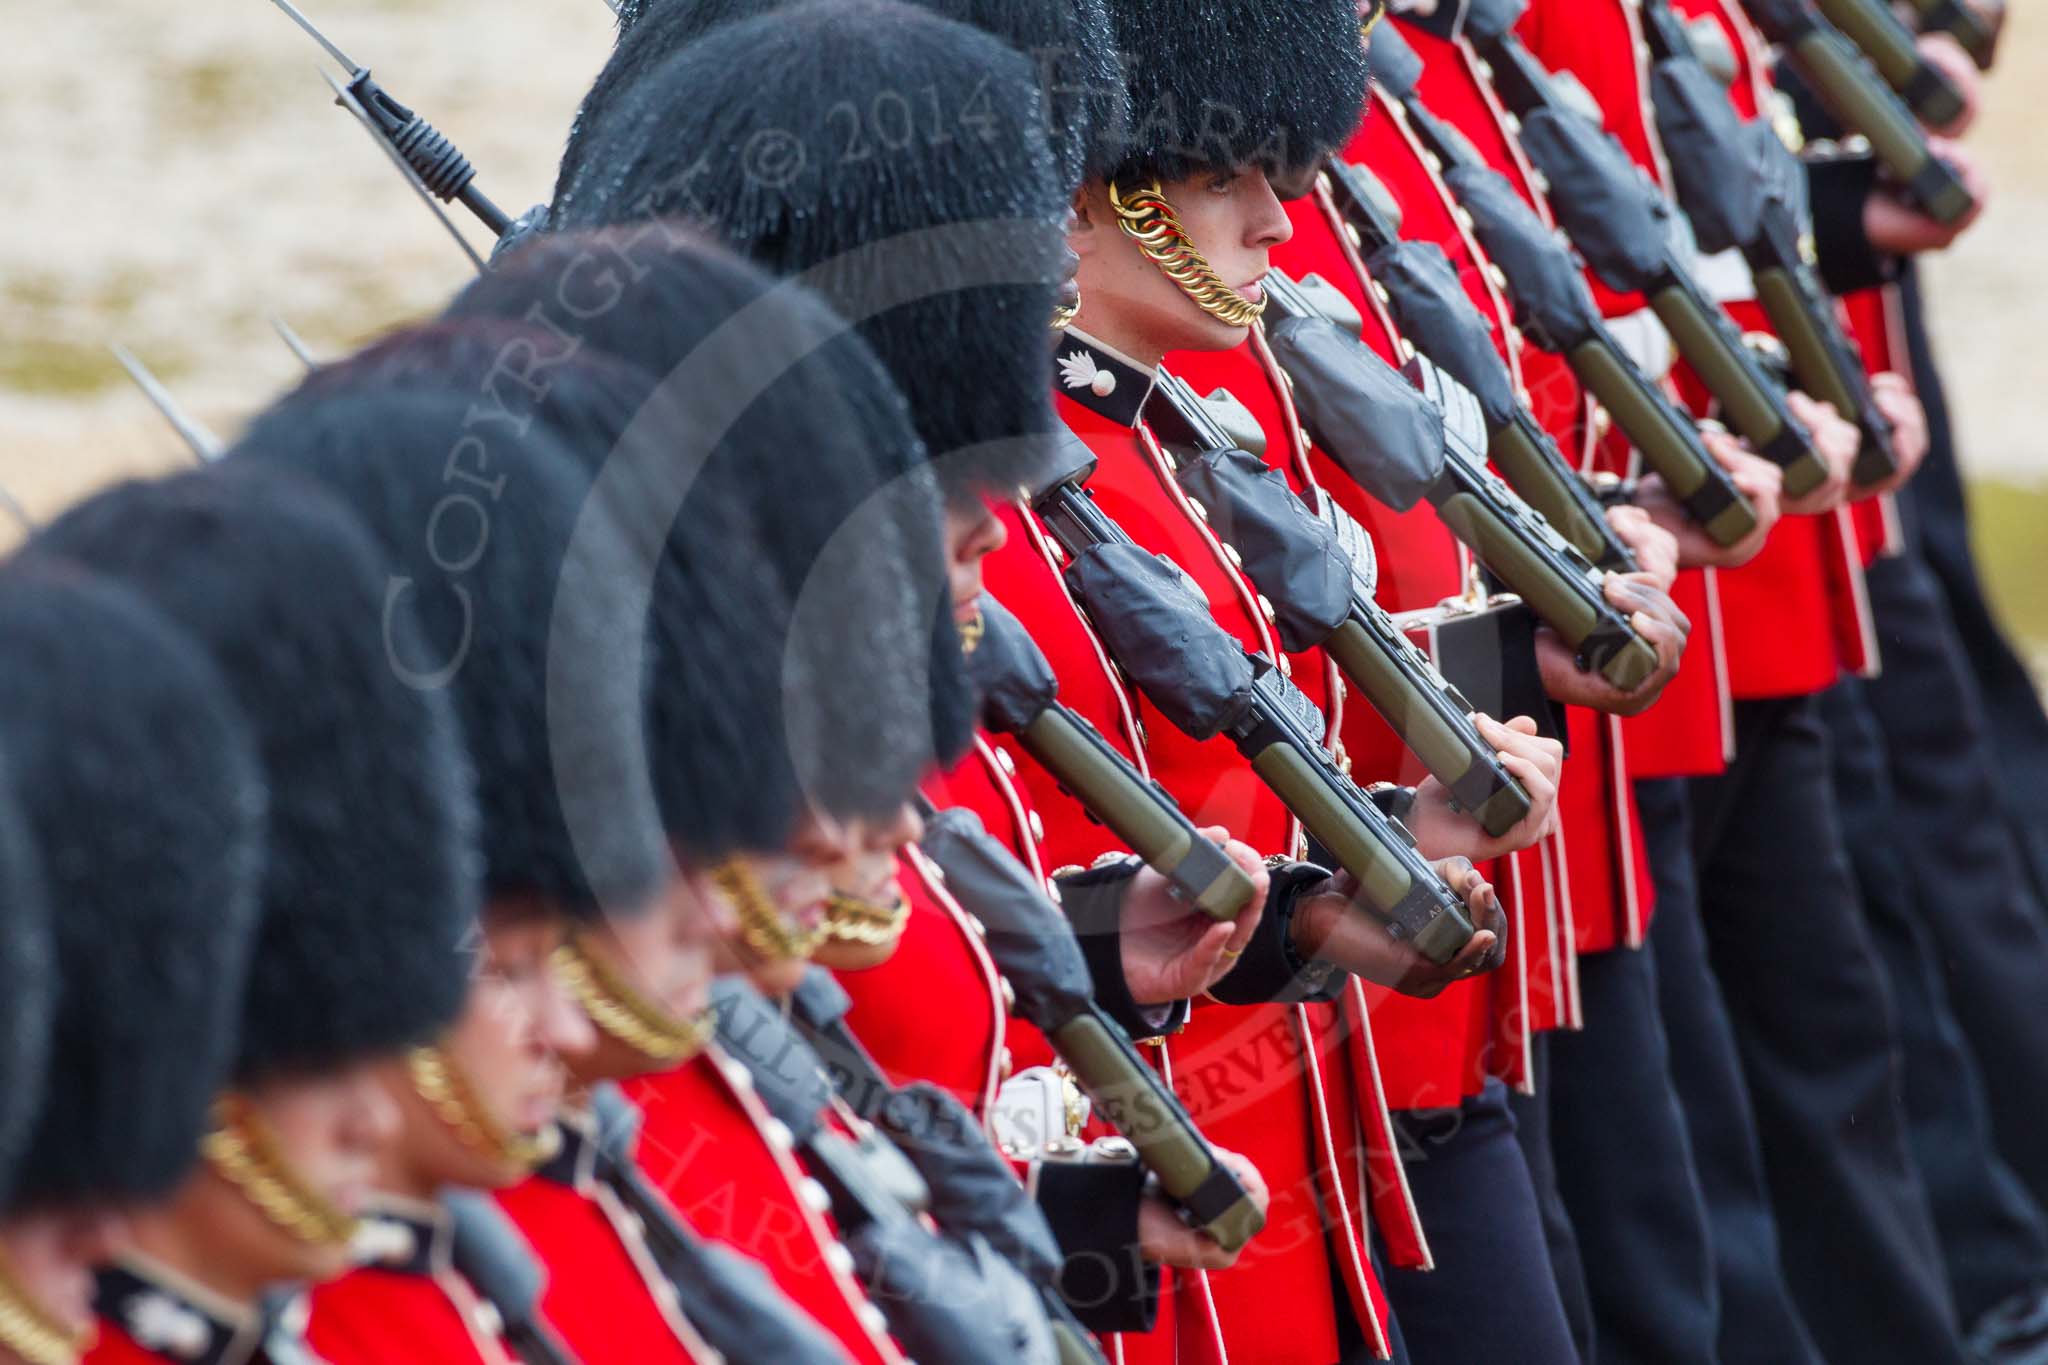 The Colonel's Review 2014.
Horse Guards Parade, Westminster,
London,

United Kingdom,
on 07 June 2014 at 11:36, image #517